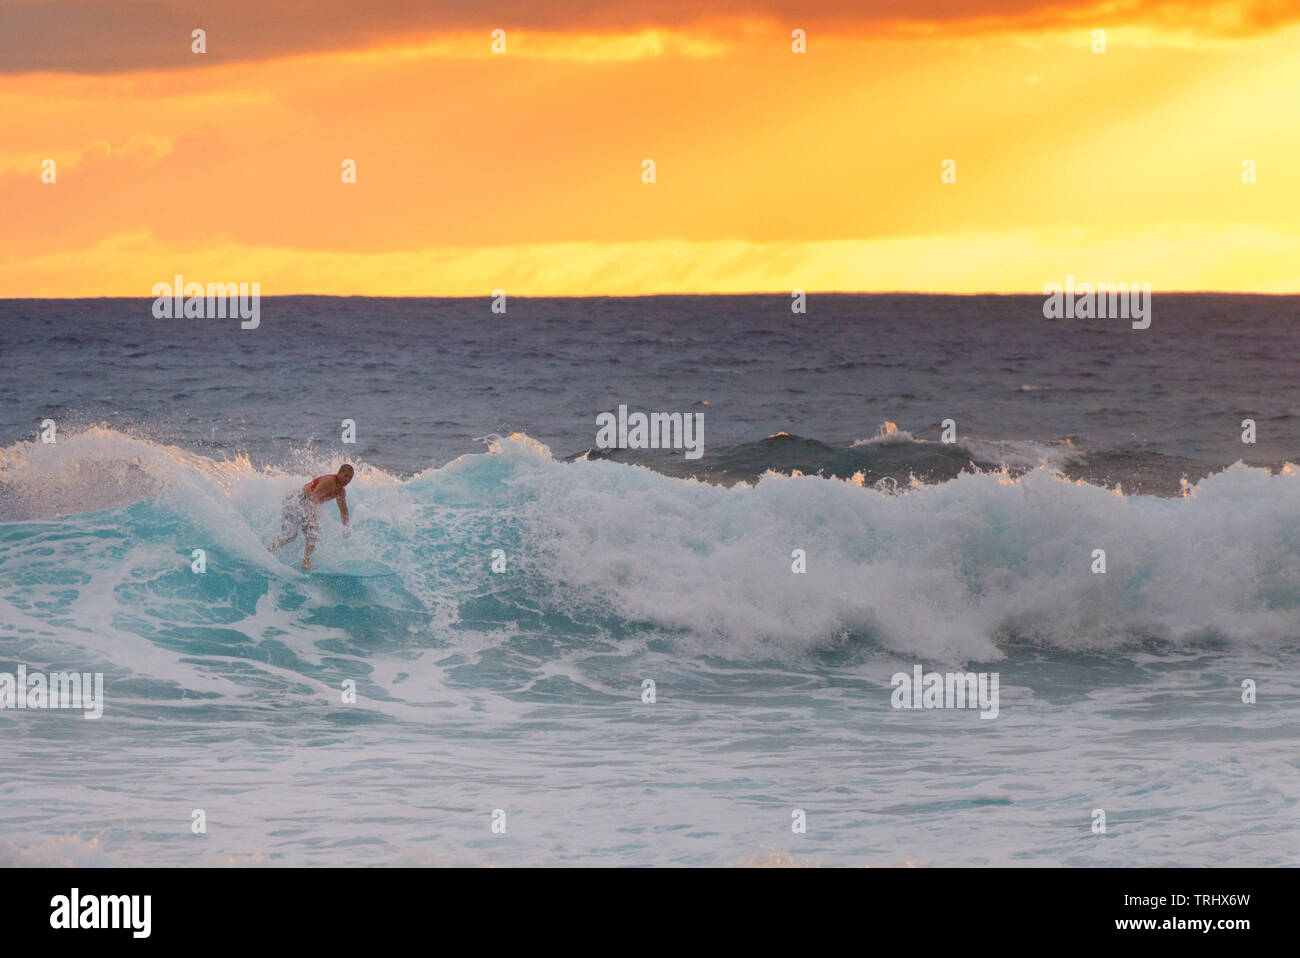 MAKAHA, HAWAII - Anonymous surfer catching a wave on Makaha Beach on January 29, 2015. The beach is reputed to be the birthplace of surfing. Stock Photo